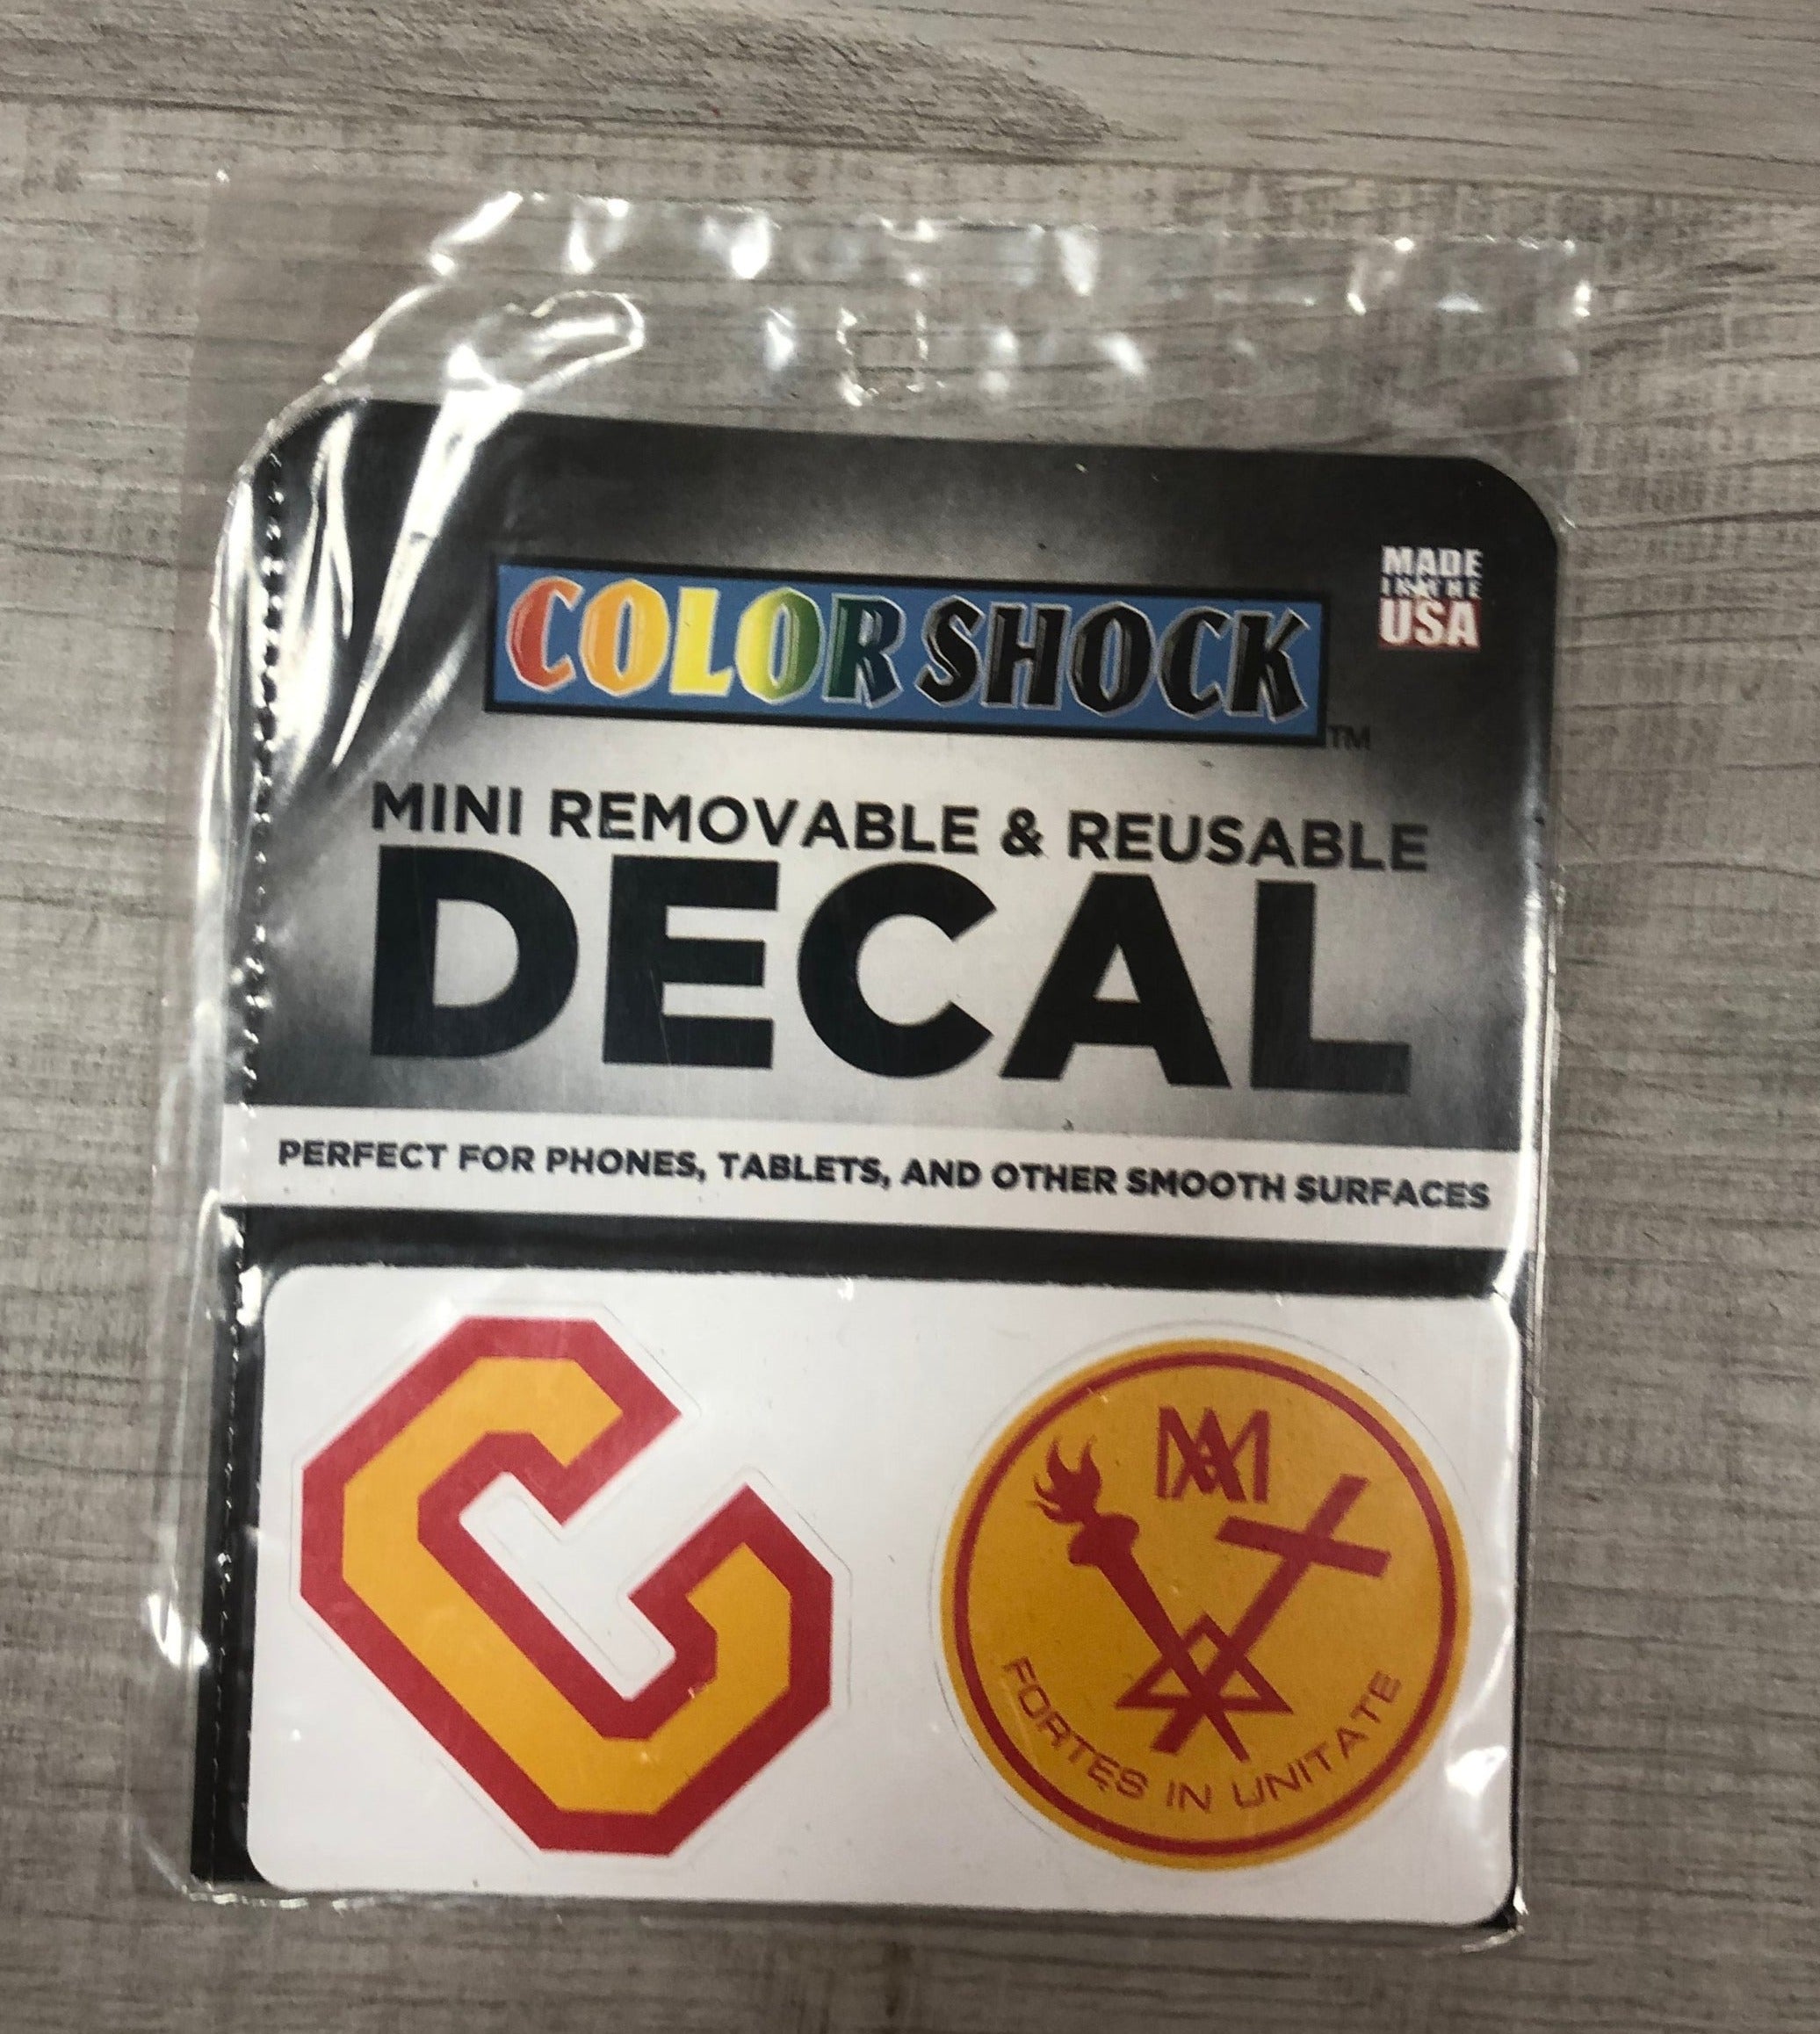 "C" and "Seal" Mini Removable & Reusable Decal